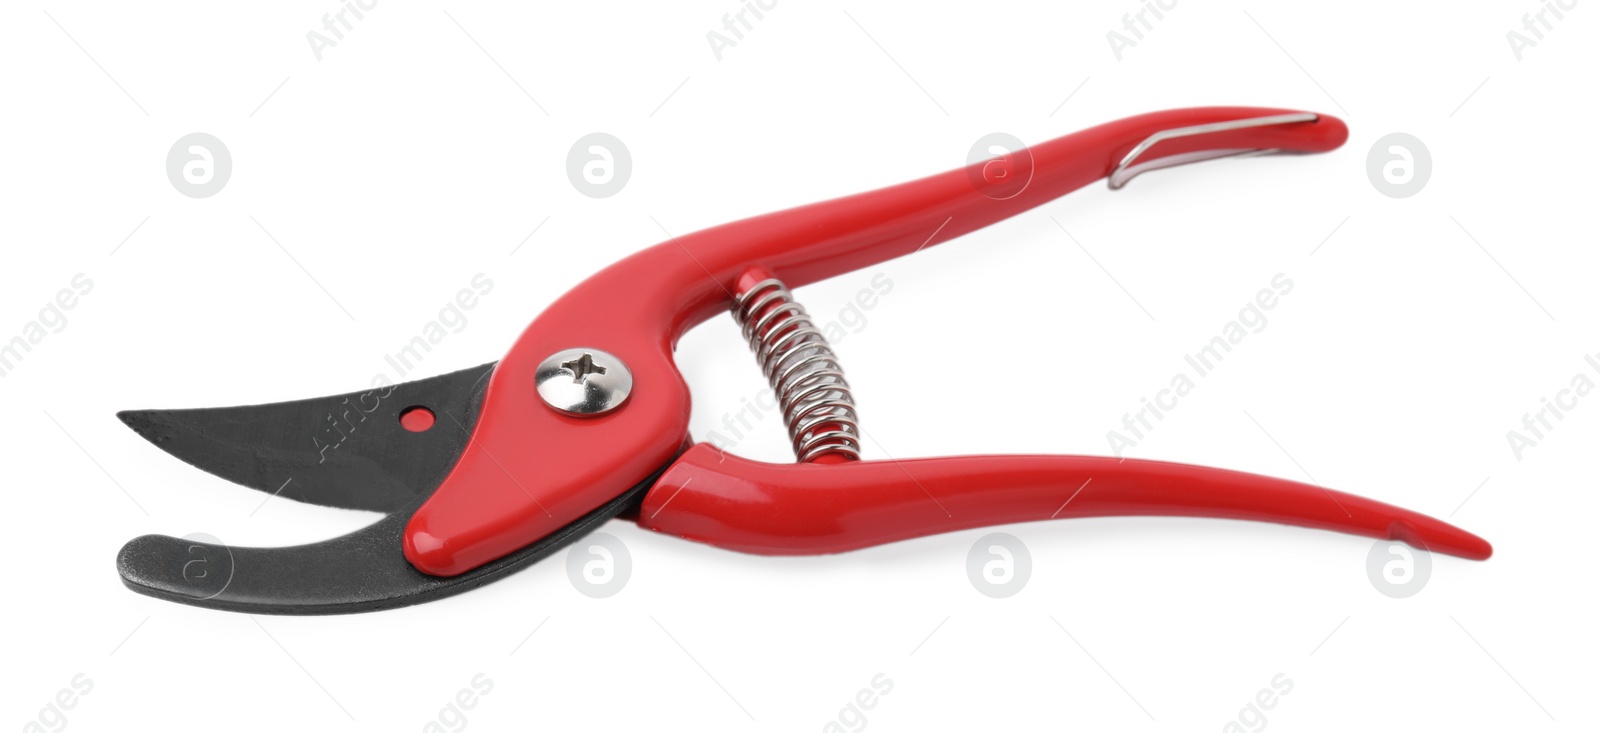 Photo of Secateurs with red handles isolated on white. Gardening tool